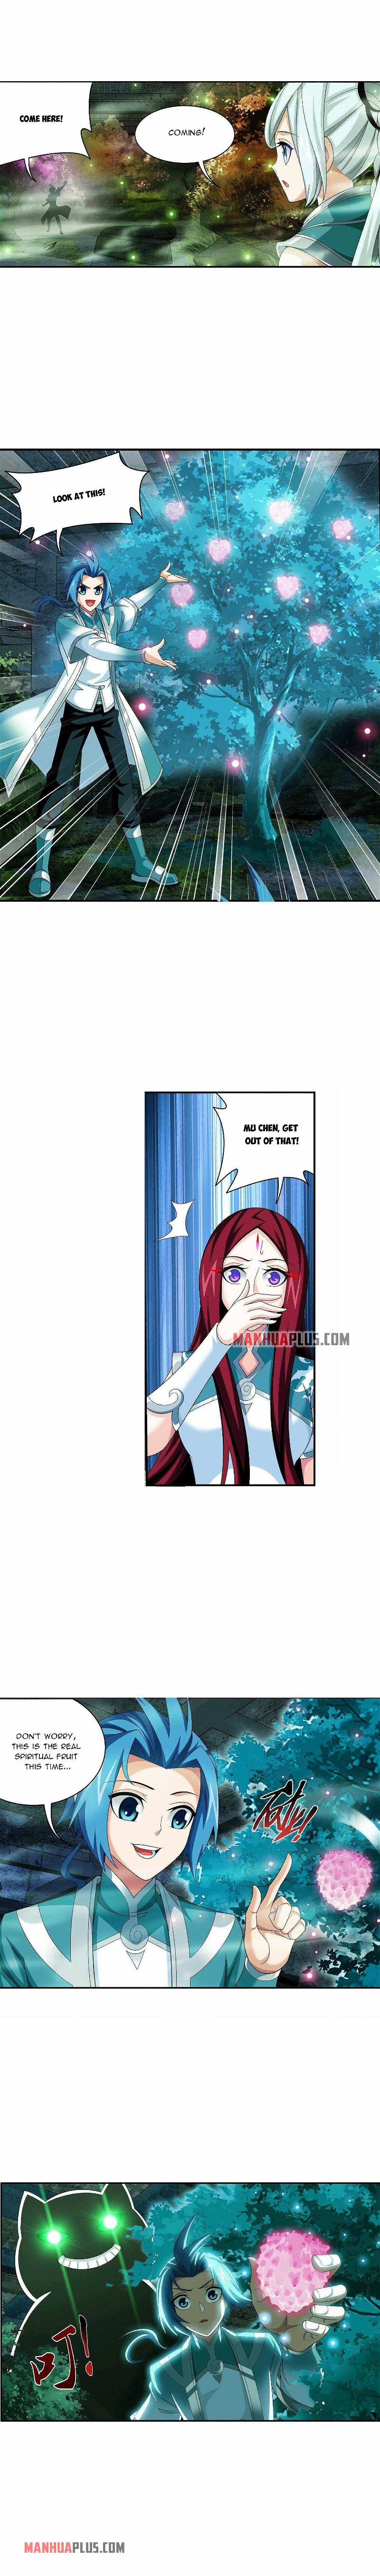 The Great Ruler Chapter 288 page 6